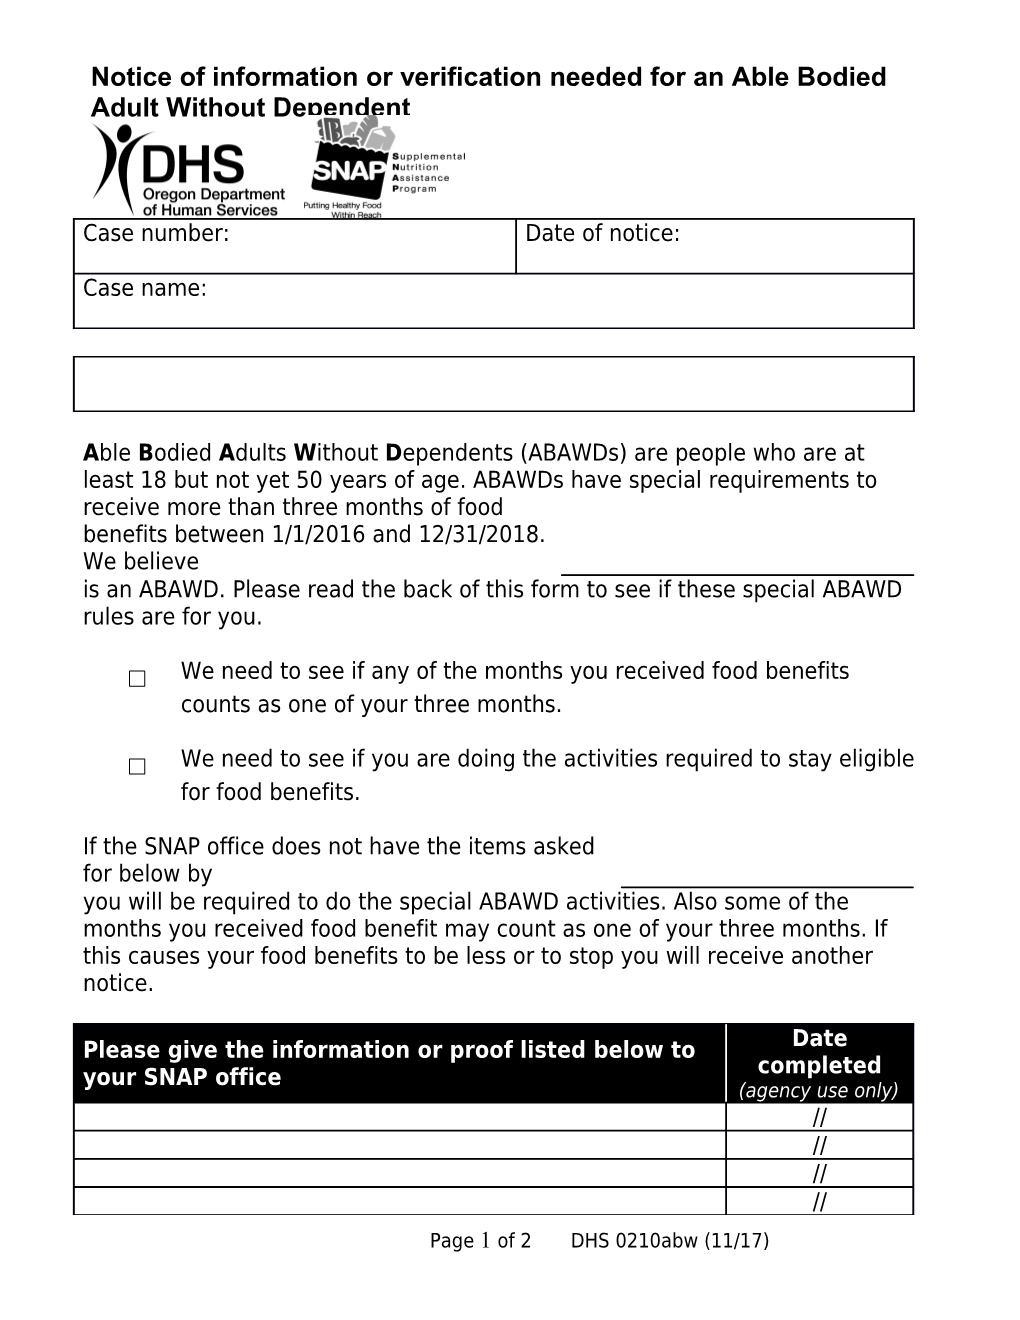 We Need to See If Any of the Months You Received Food Benefits Counts As One of Your Three